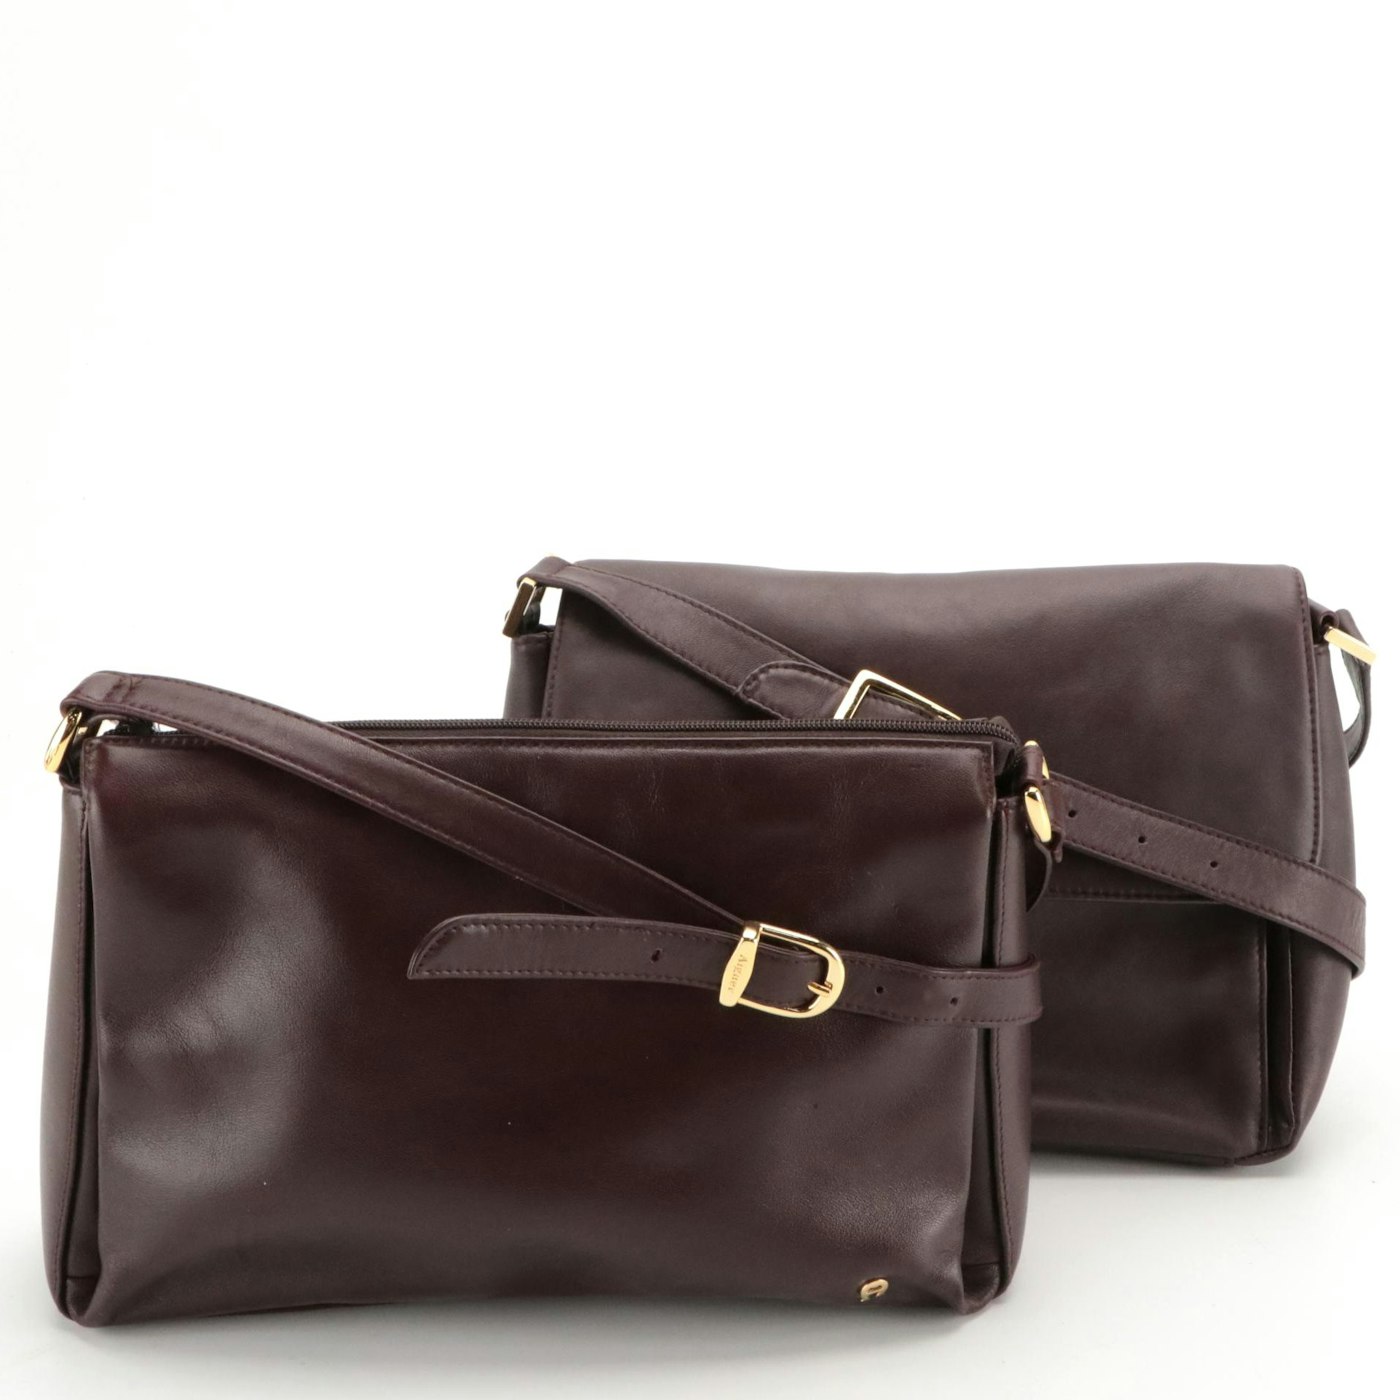 Etienne Aigner Shoulder Bags 90364 and 7892R in Burgundy Leather | EBTH